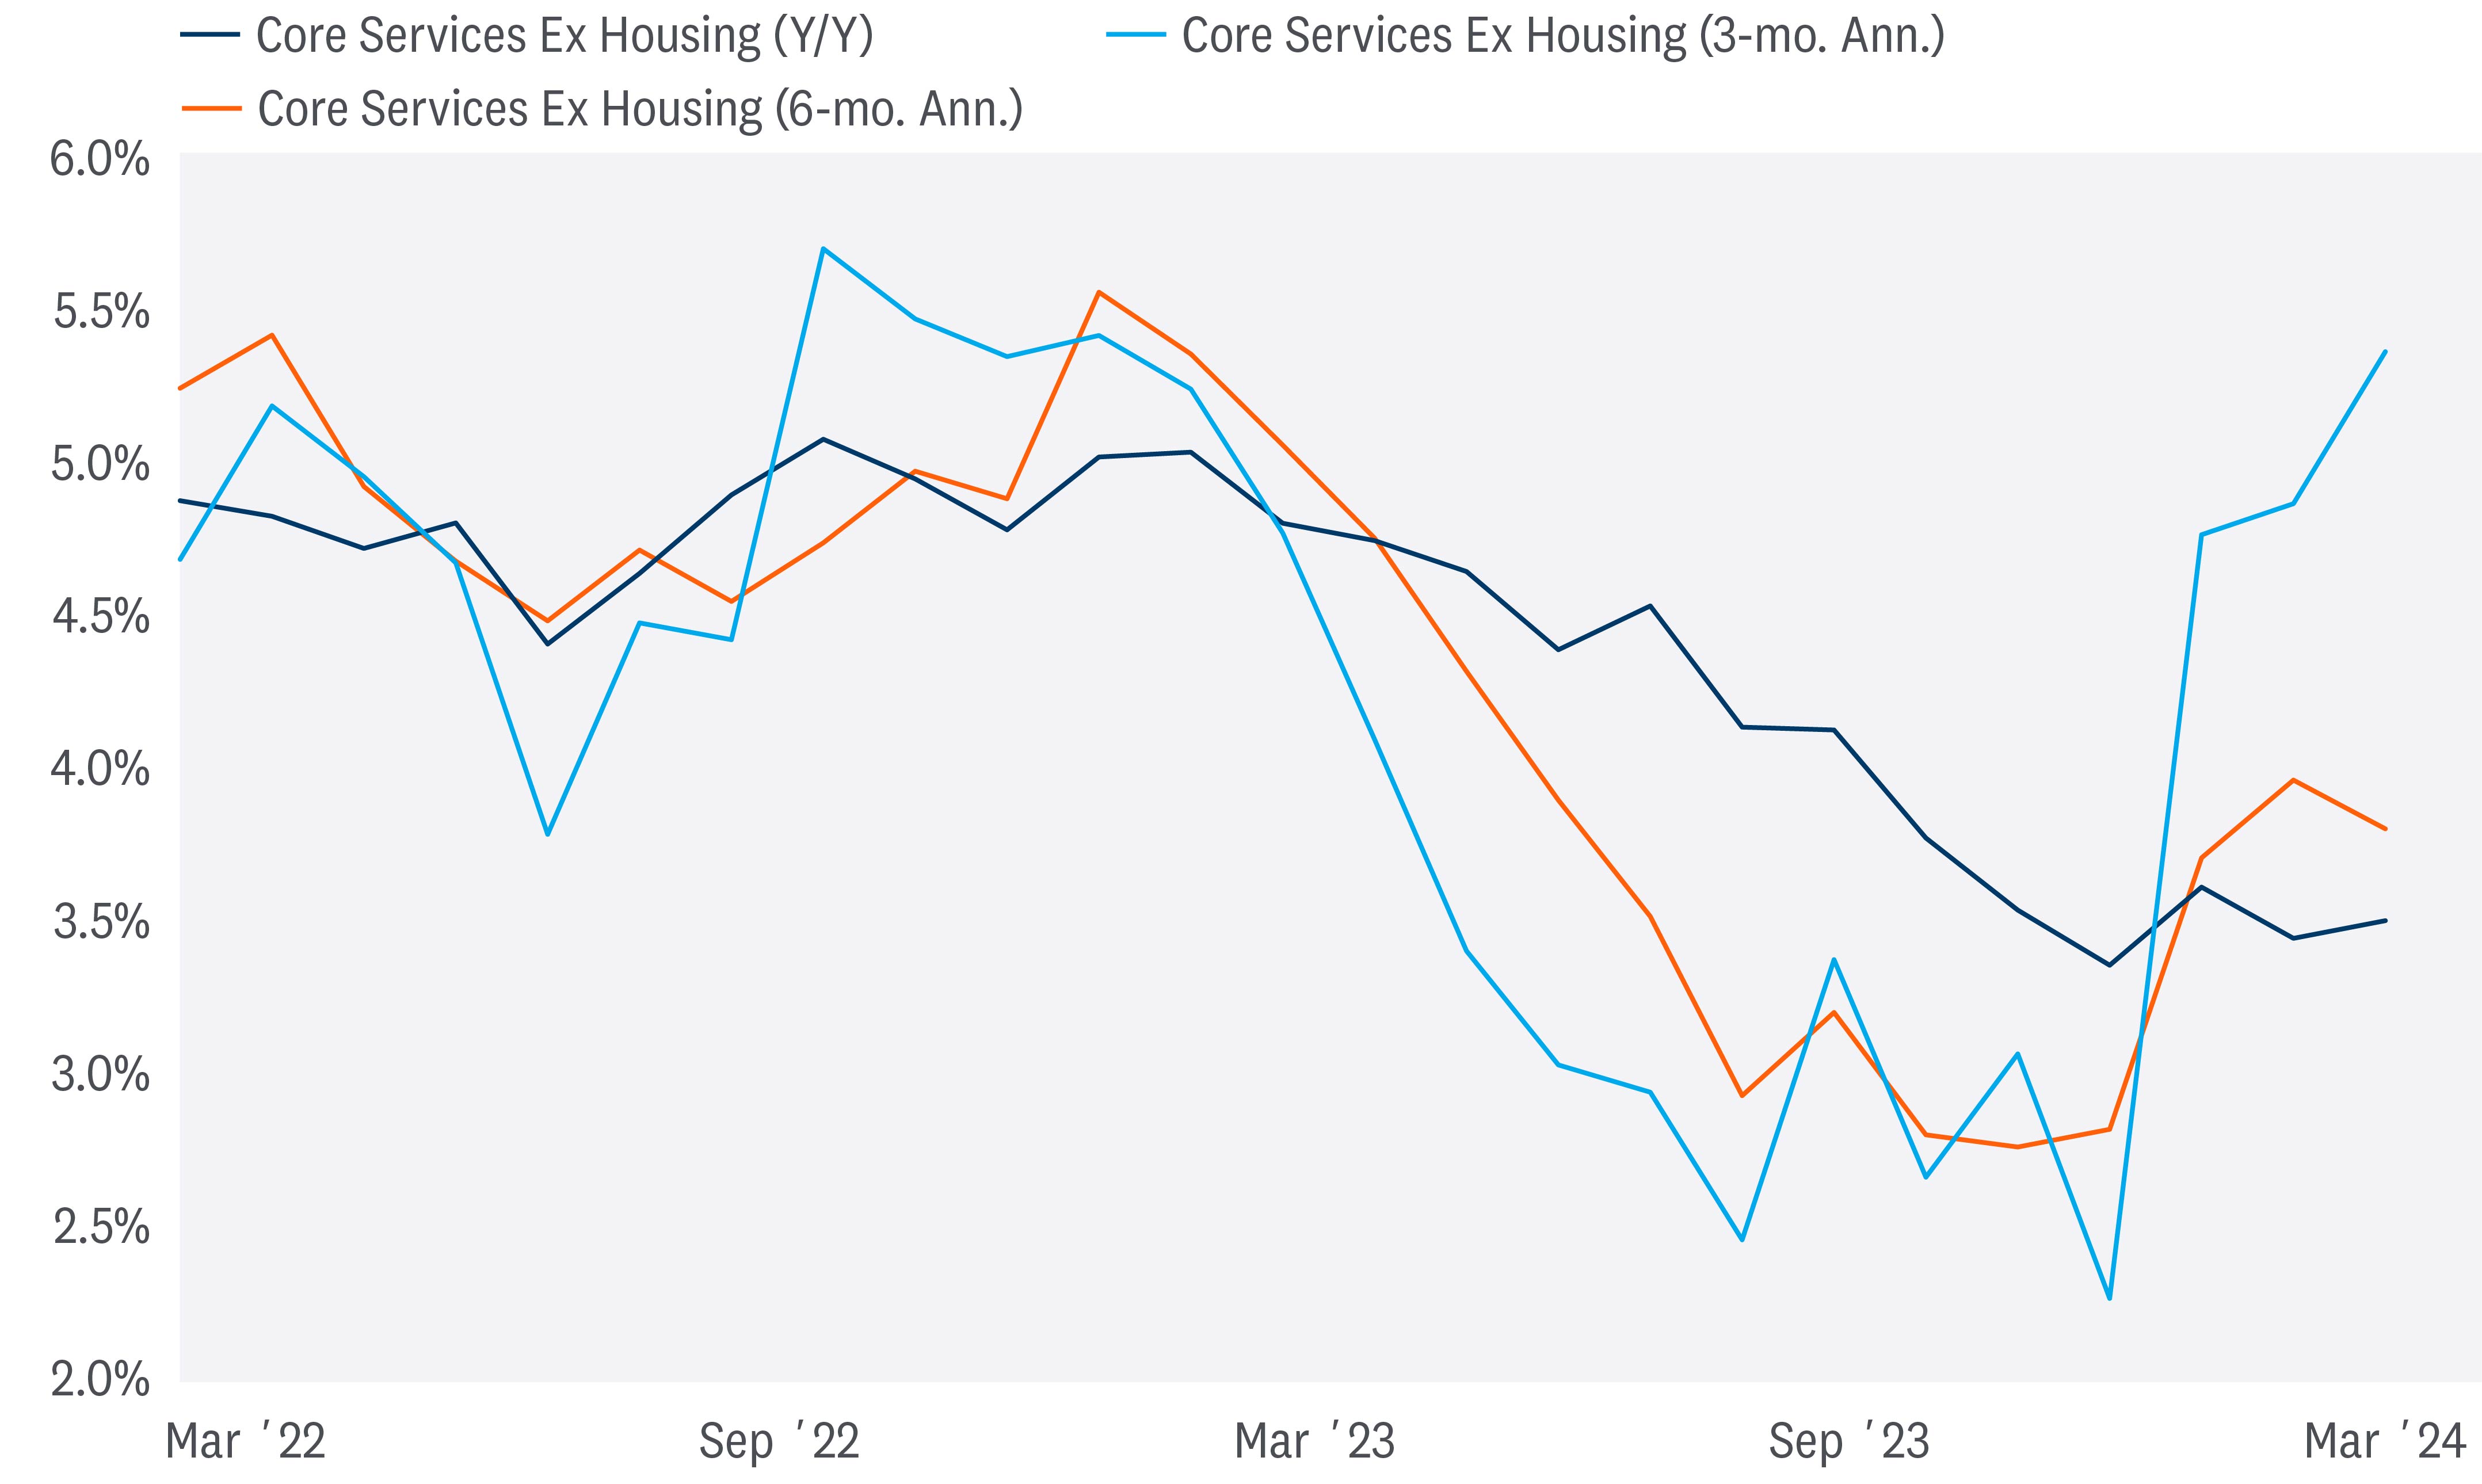 Line graph of Personal Consumption Expenditures data from March 2022 to March 2024. The line graph represents core services excluding housing year over year, core services excluding housing for 6 months annualized, and core services excluding housing for 3 months annualized. 